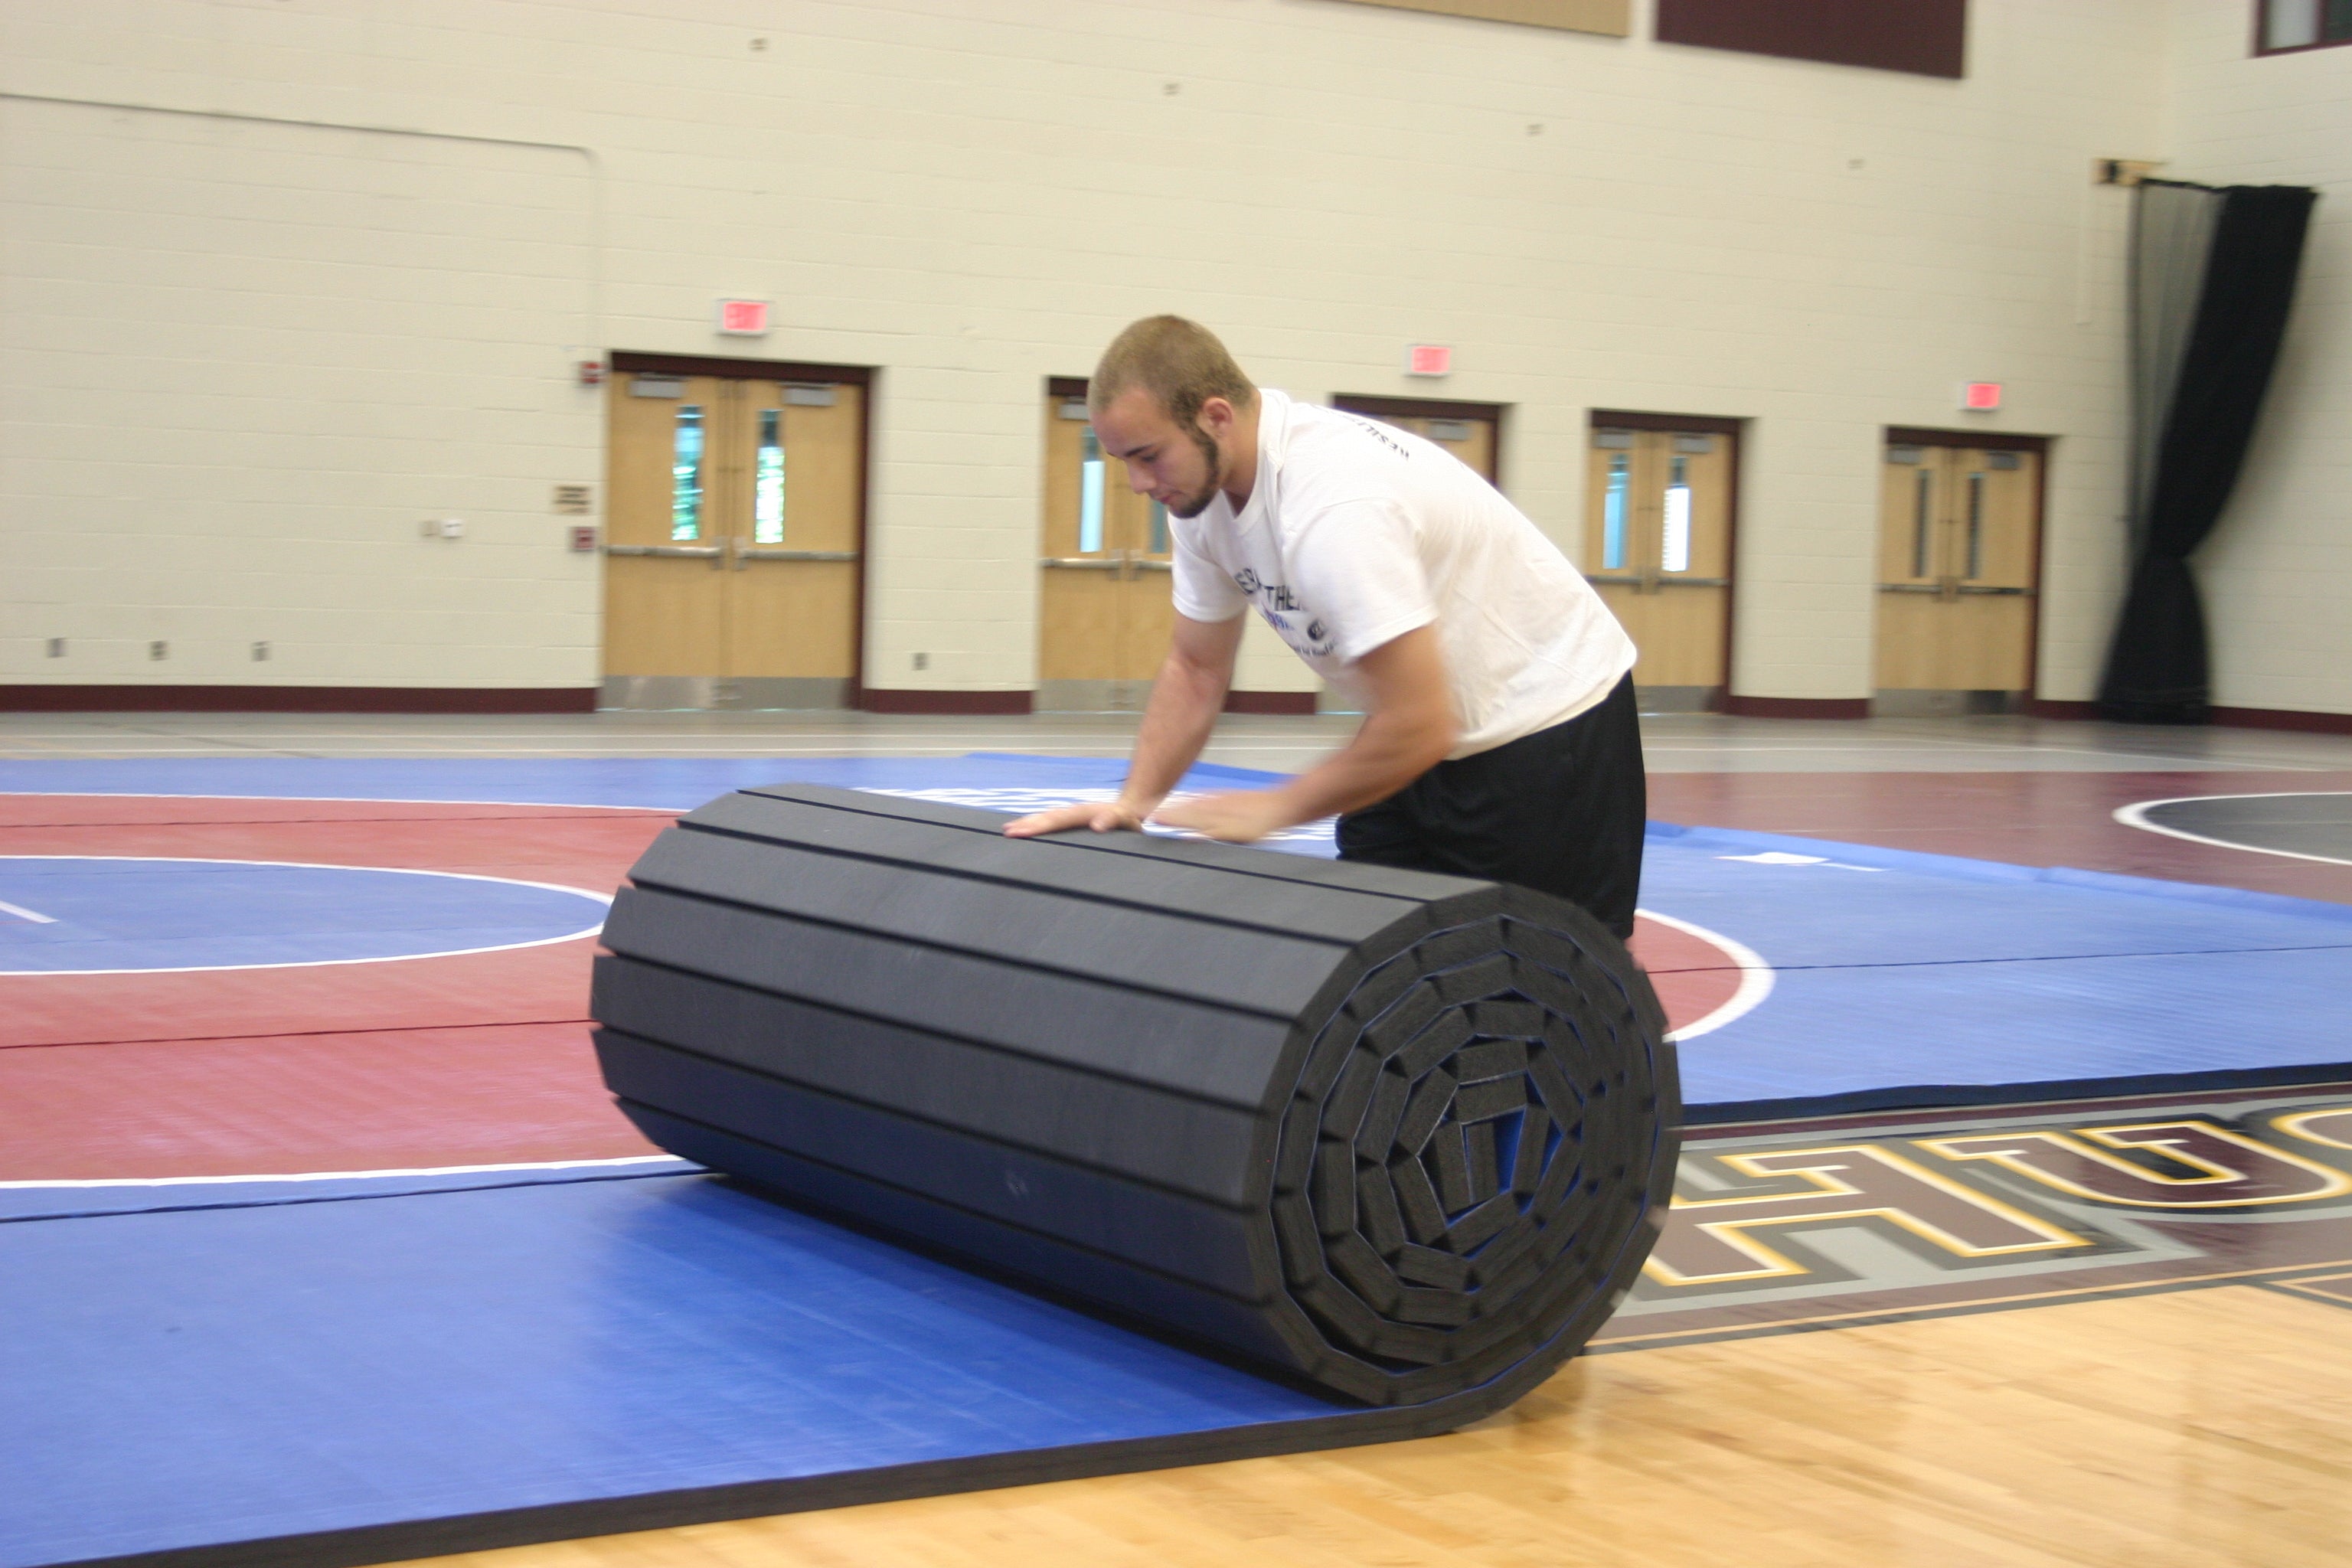 Resilite Wrestling Mats - Used in 99% of All Division I Wrestling Rooms